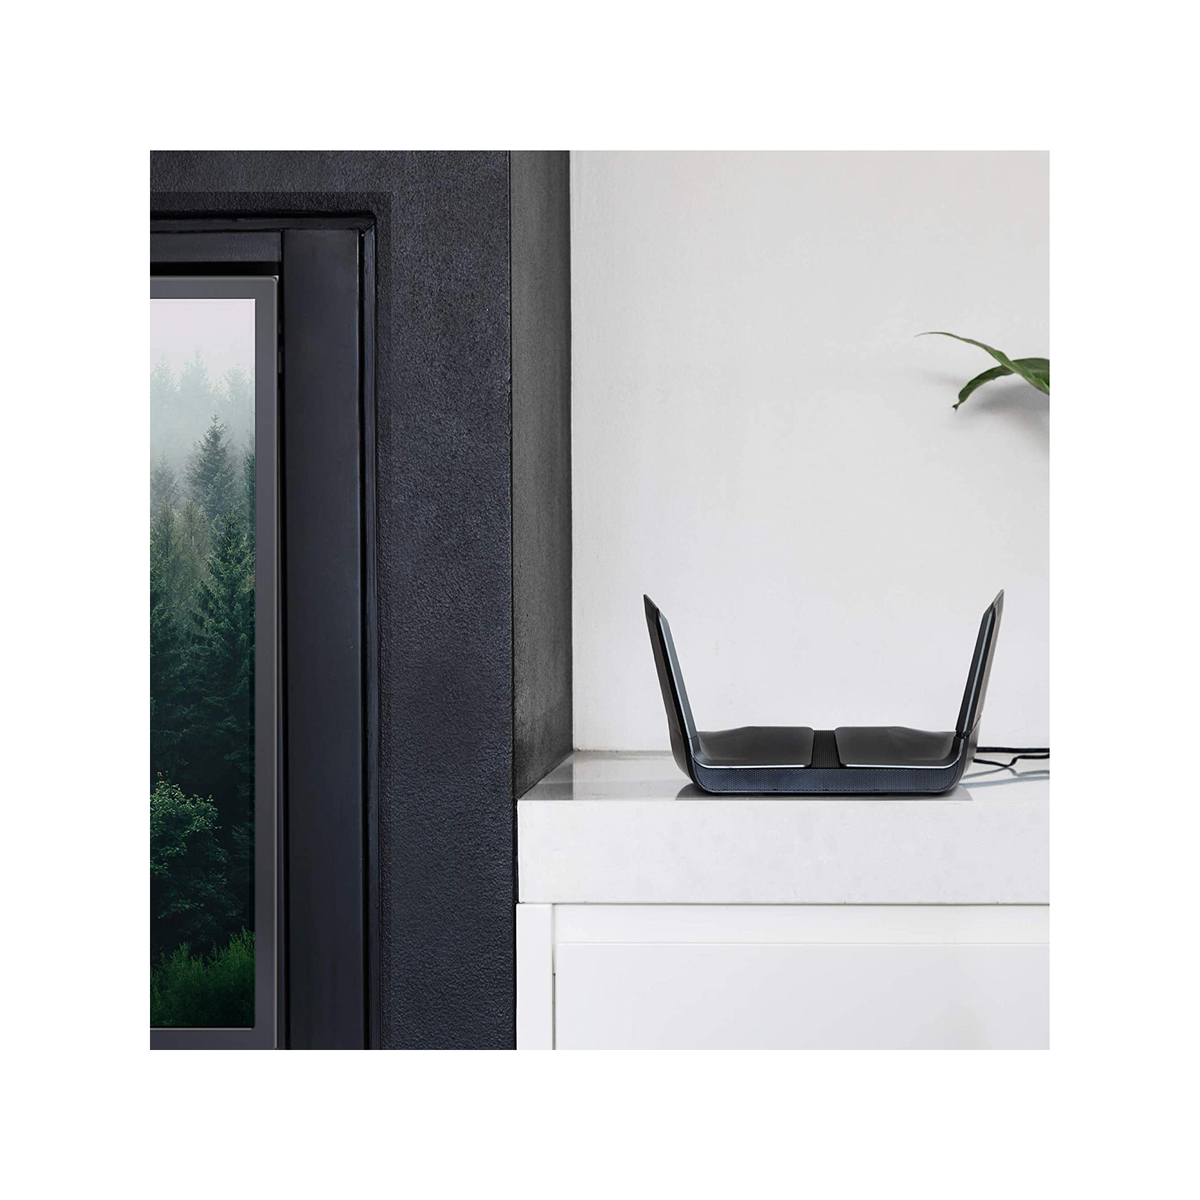 Netgear NG-RAX80-100EUS Nighthawk AX8 Wi-Fi 6 Next-Gen Router, AX6000 Up to 6 Gbps, Ideal for Medium to Large Smart Homes (RAX80)